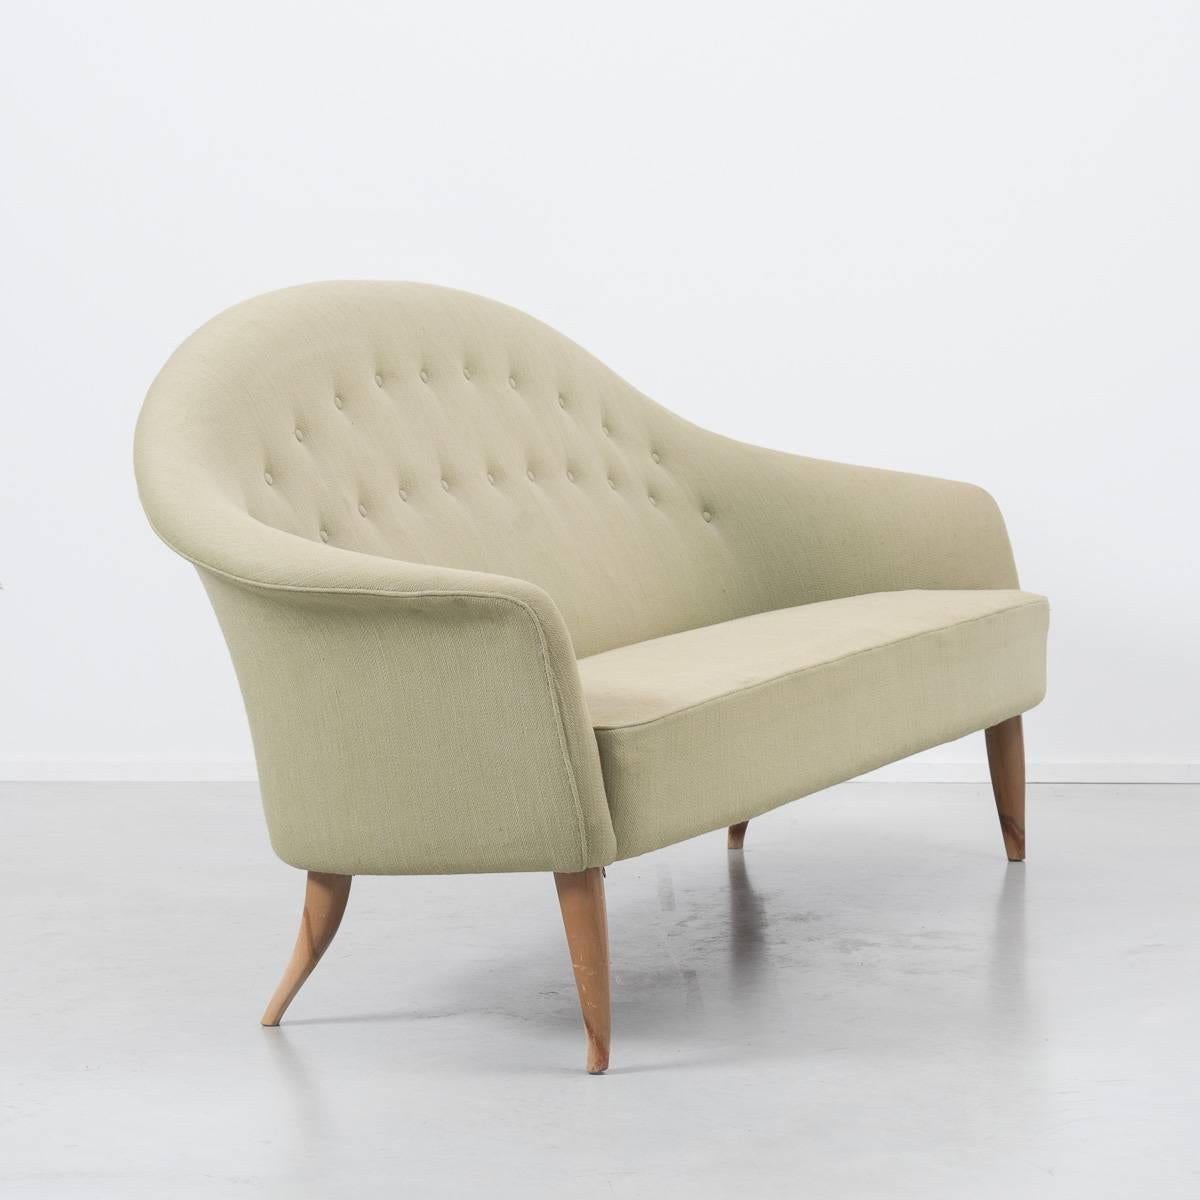 This is the larger three-seat version of the Paradiset sofa. The beautifully tapered legs compliment the curves of the sofa beautifully. The soft lines of the piece give it a soft femininity not usually found in Scandinavian design of the